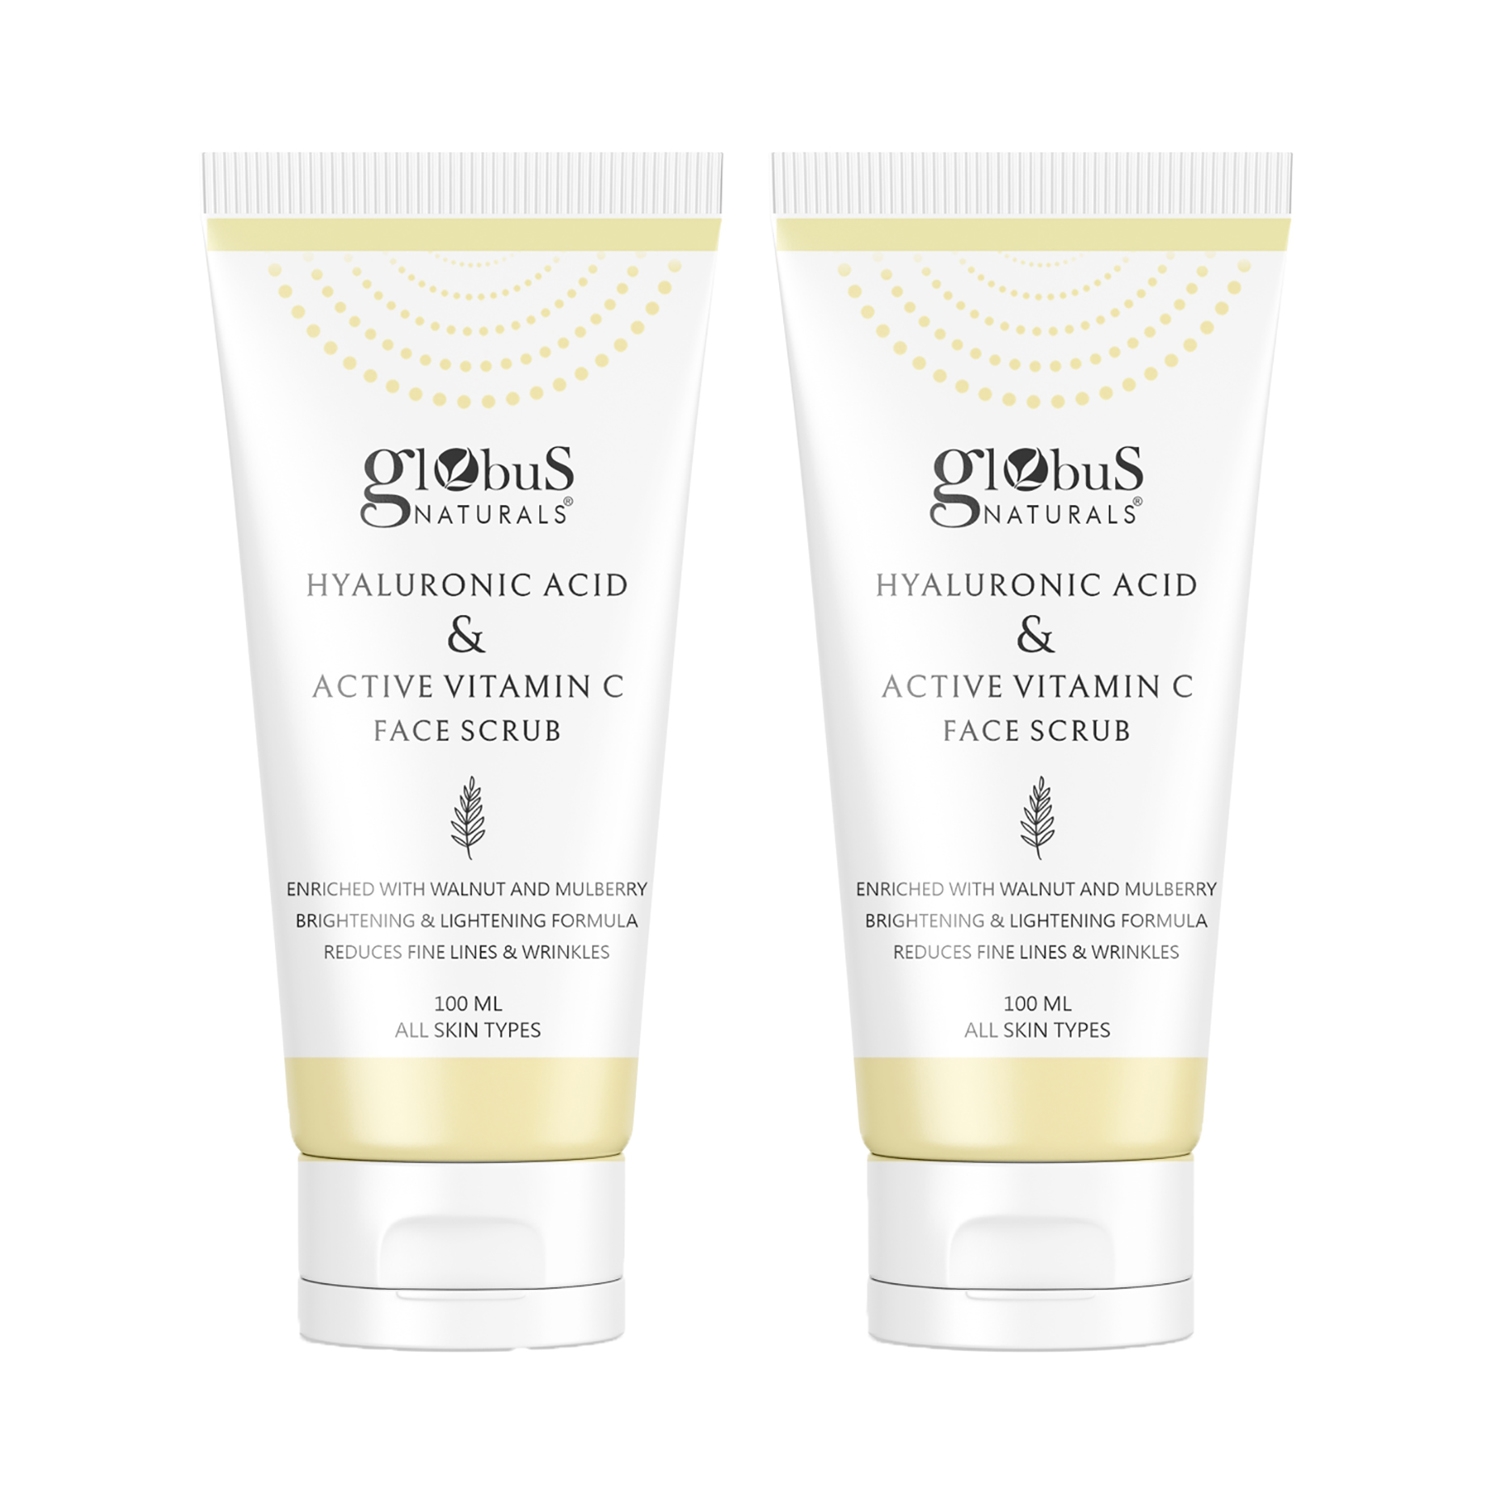 Globus Naturals | Globus Naturals Hyaluronic Acid & Vitamin C Anti Ageing Face Scrub Enriched With Walnut (2 Pcs)